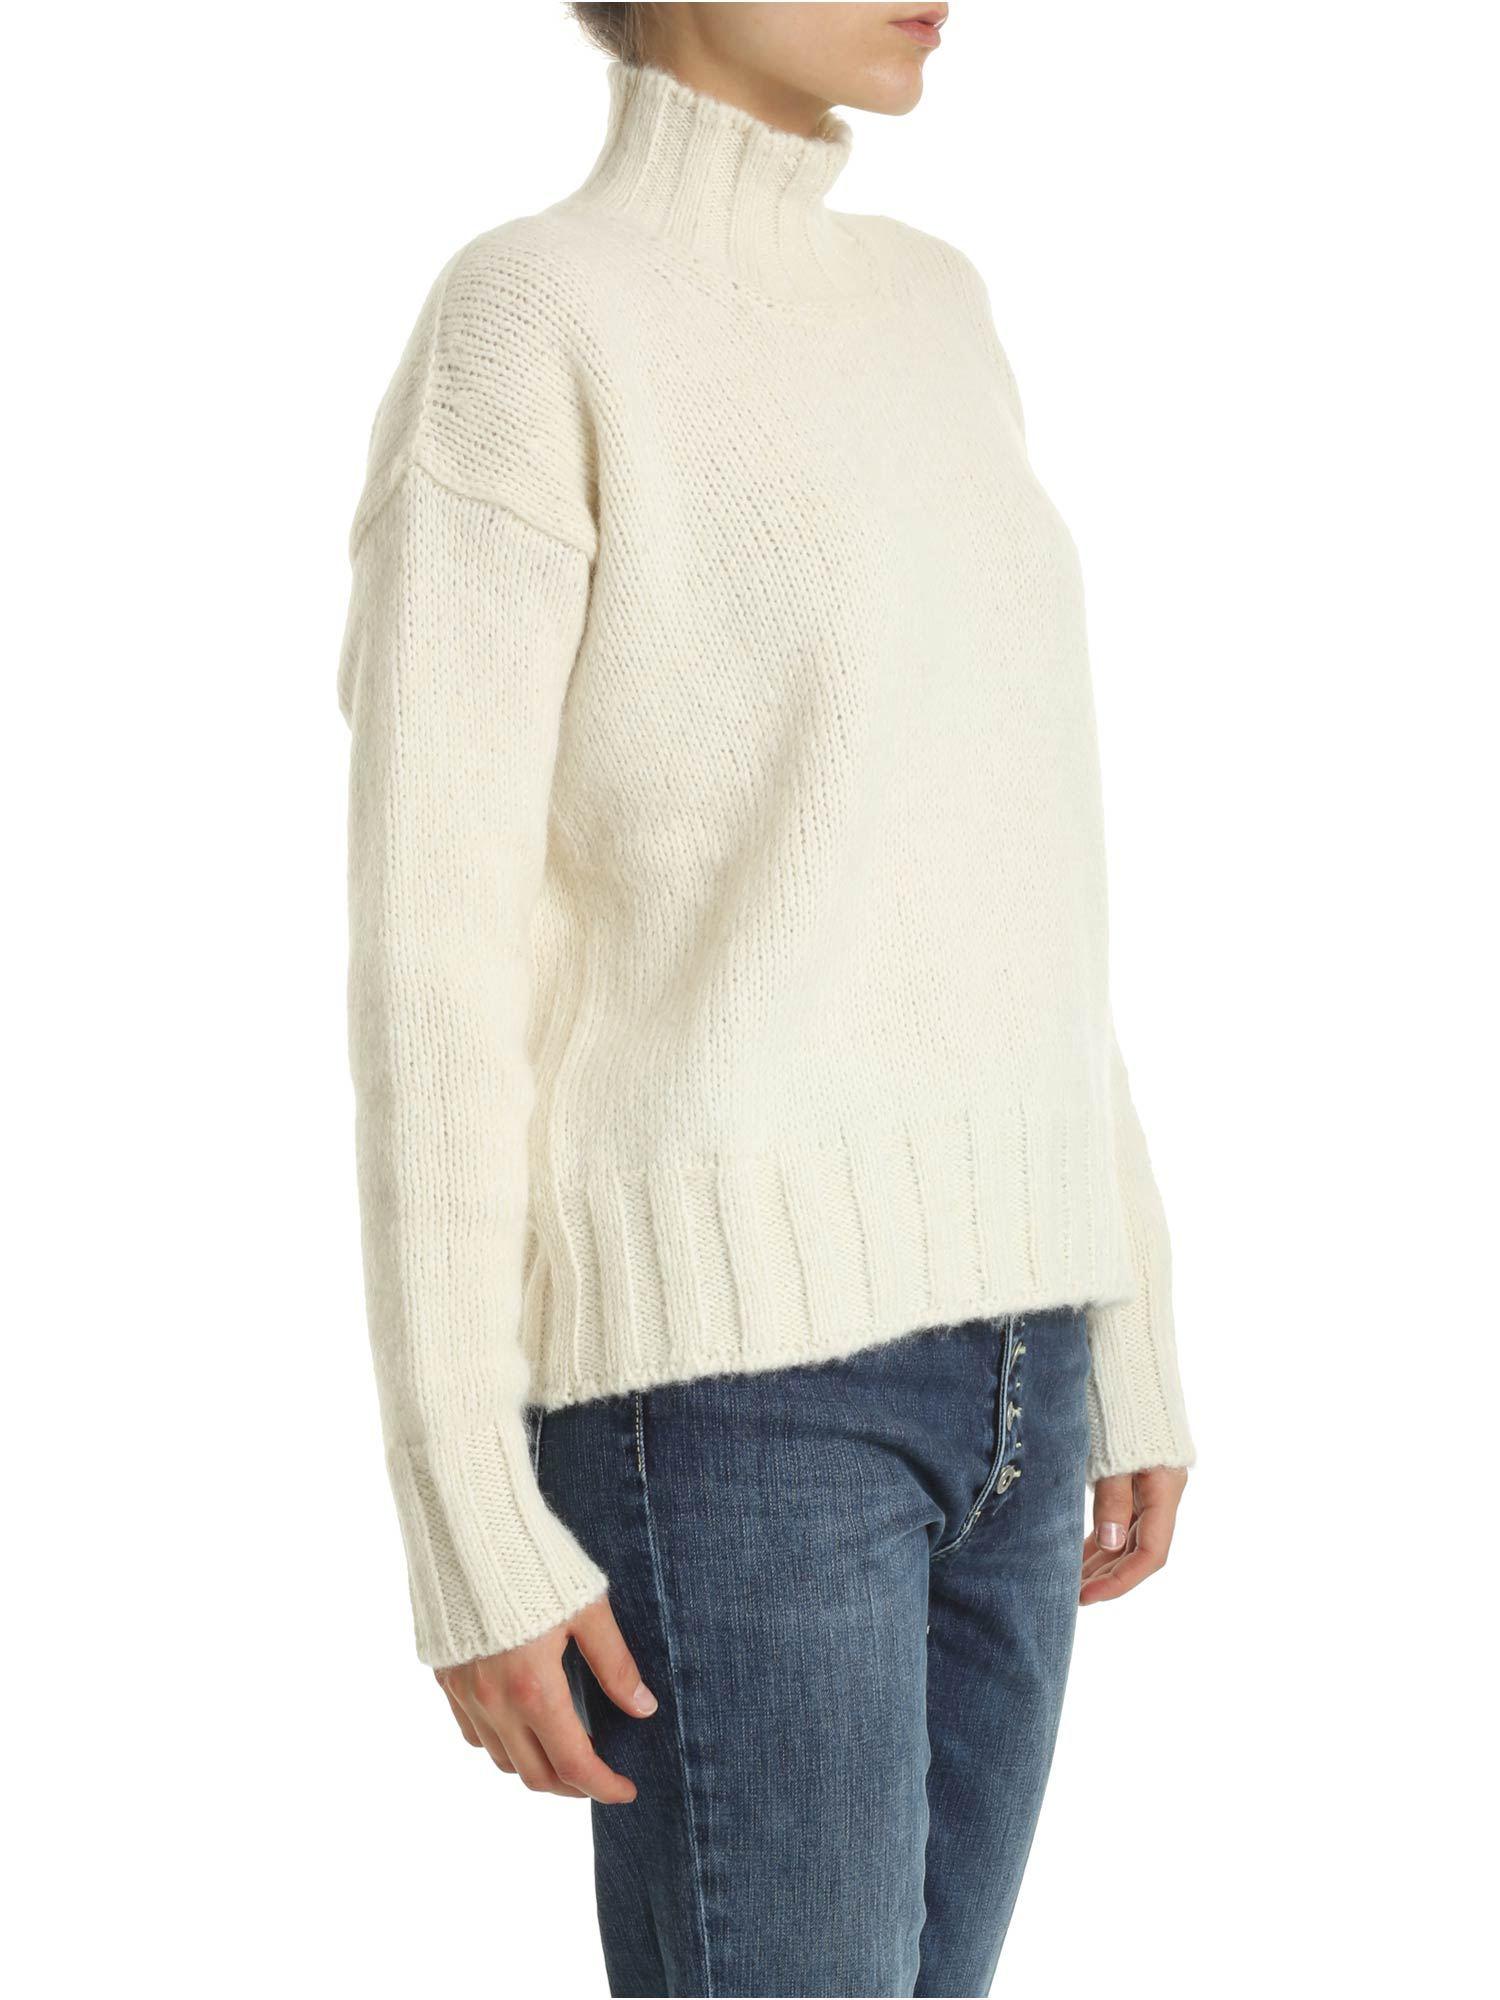 Dondup Wool Turtleneck Pullover In Cream Color in Natural - Lyst